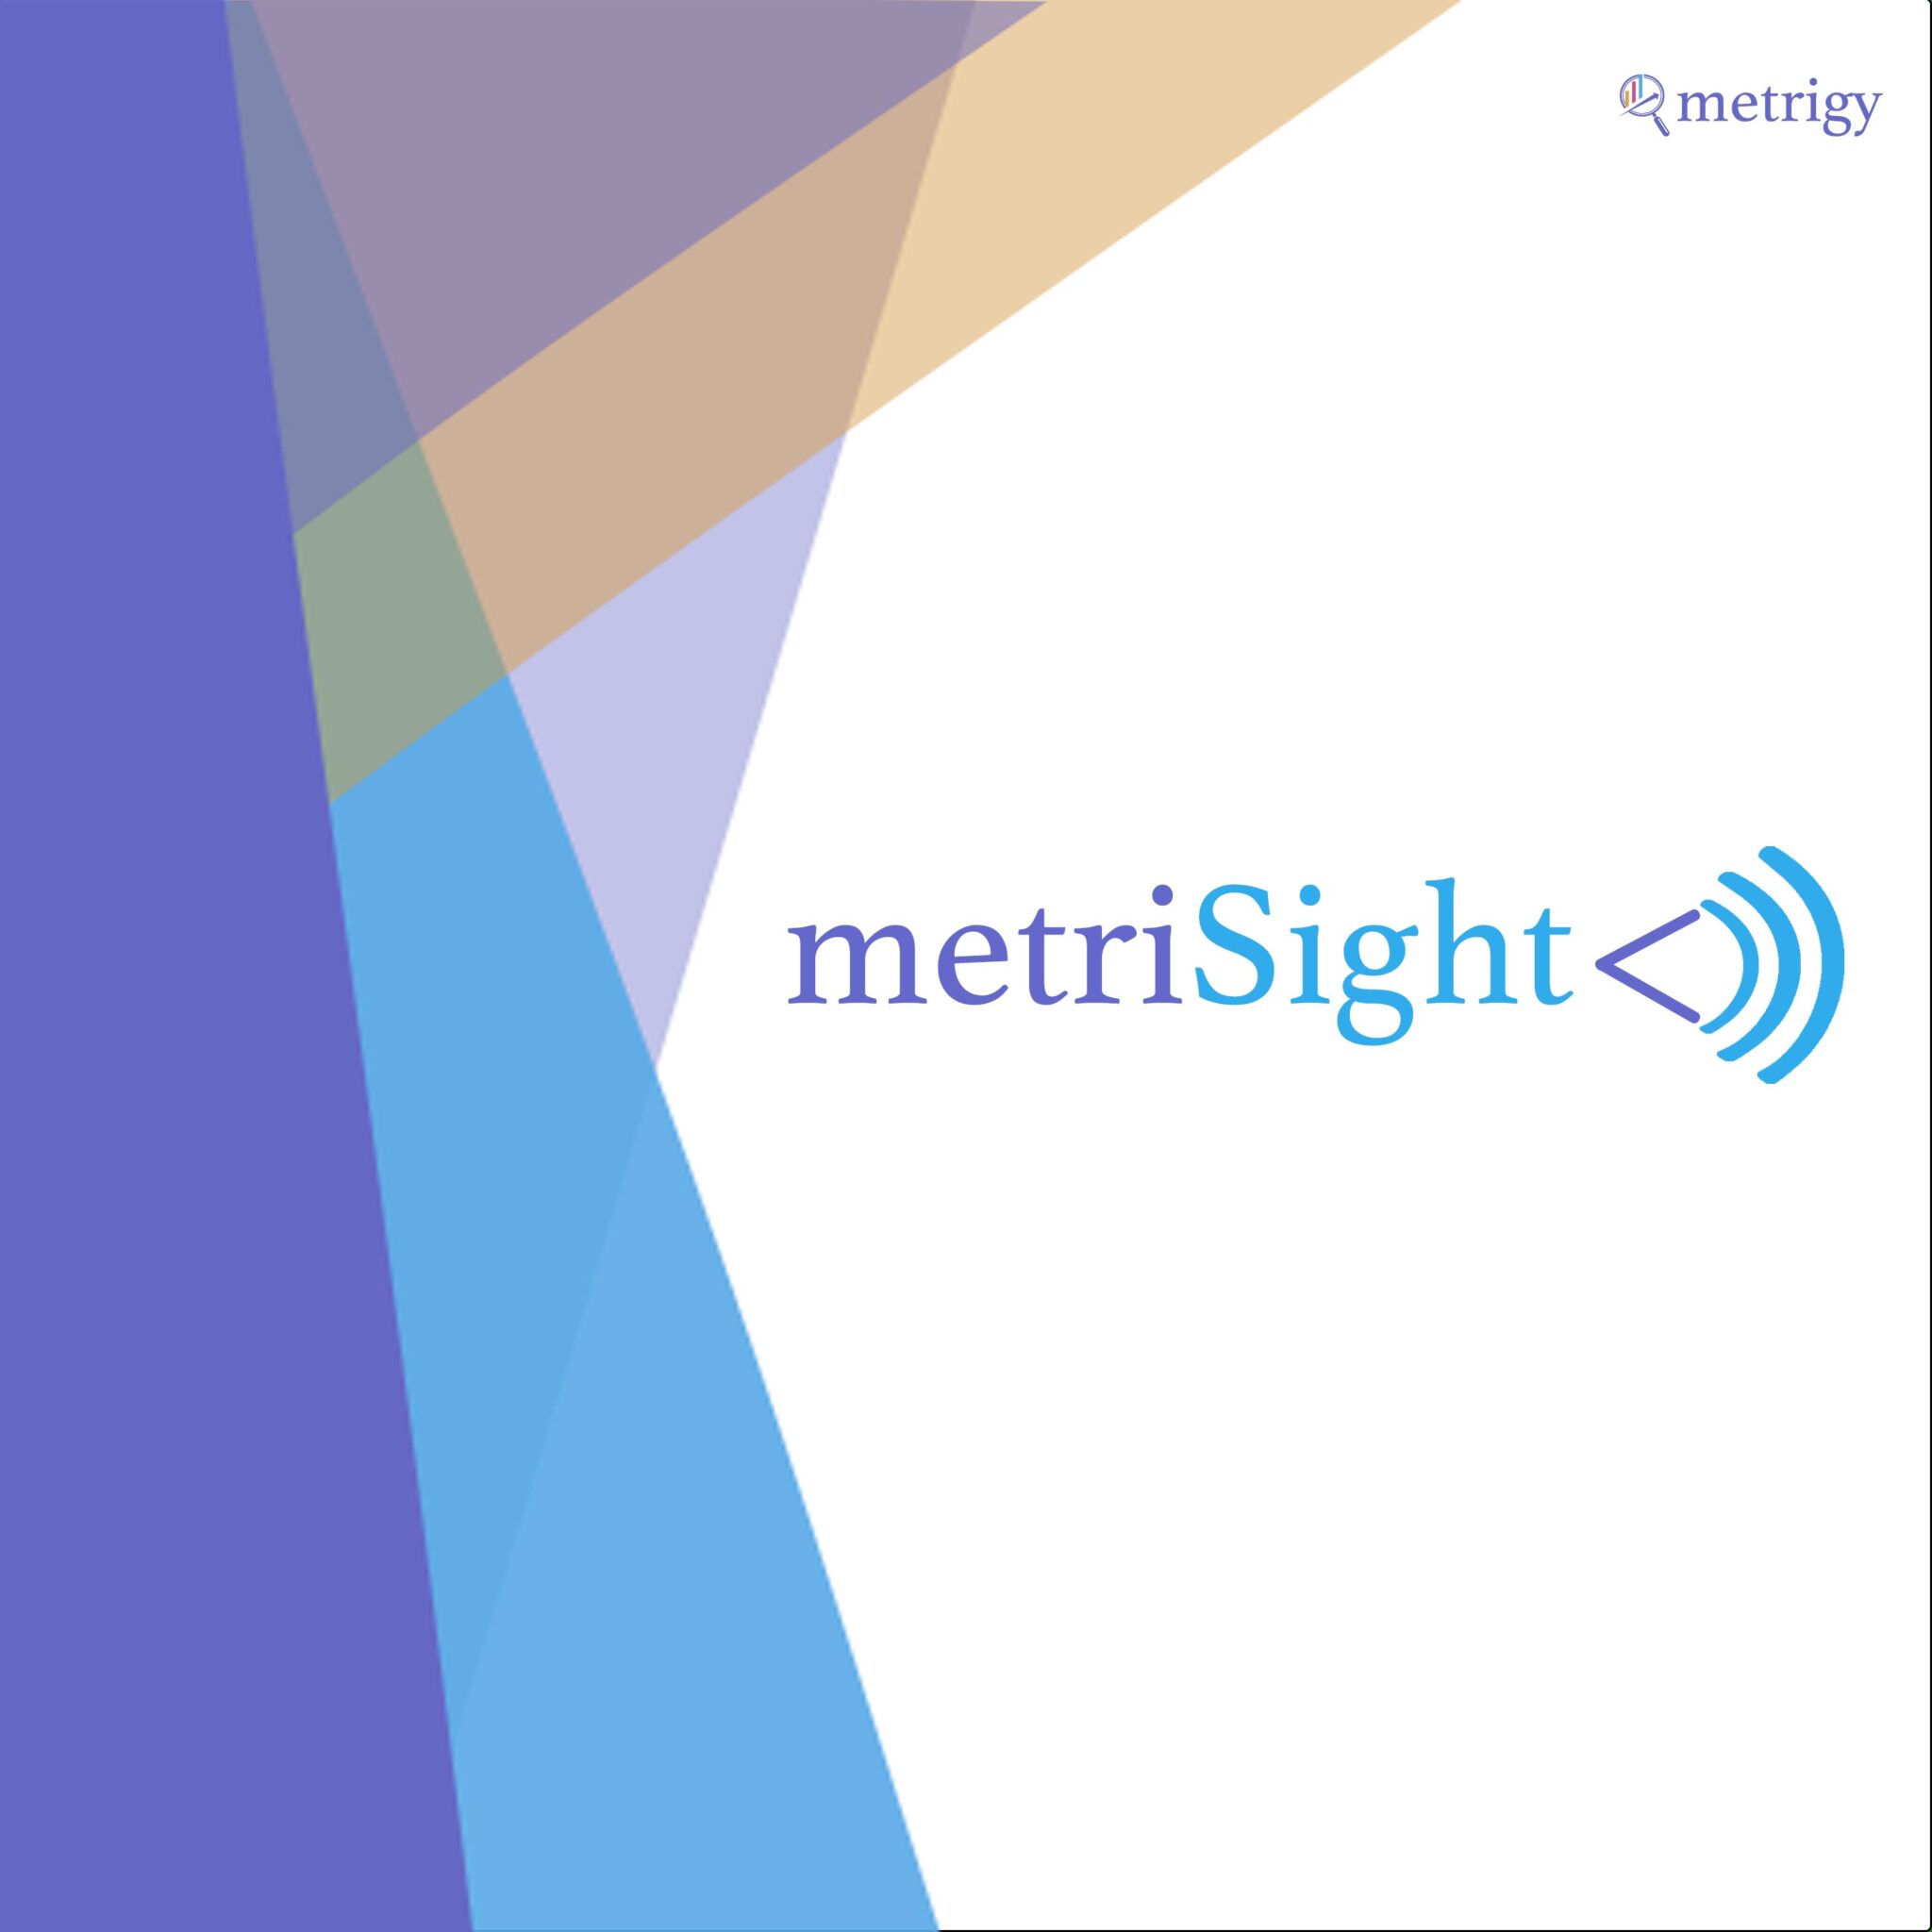 MetriSight Ep. 33 - A Conversation with Diego Alberti of Warner Brothers Discovery